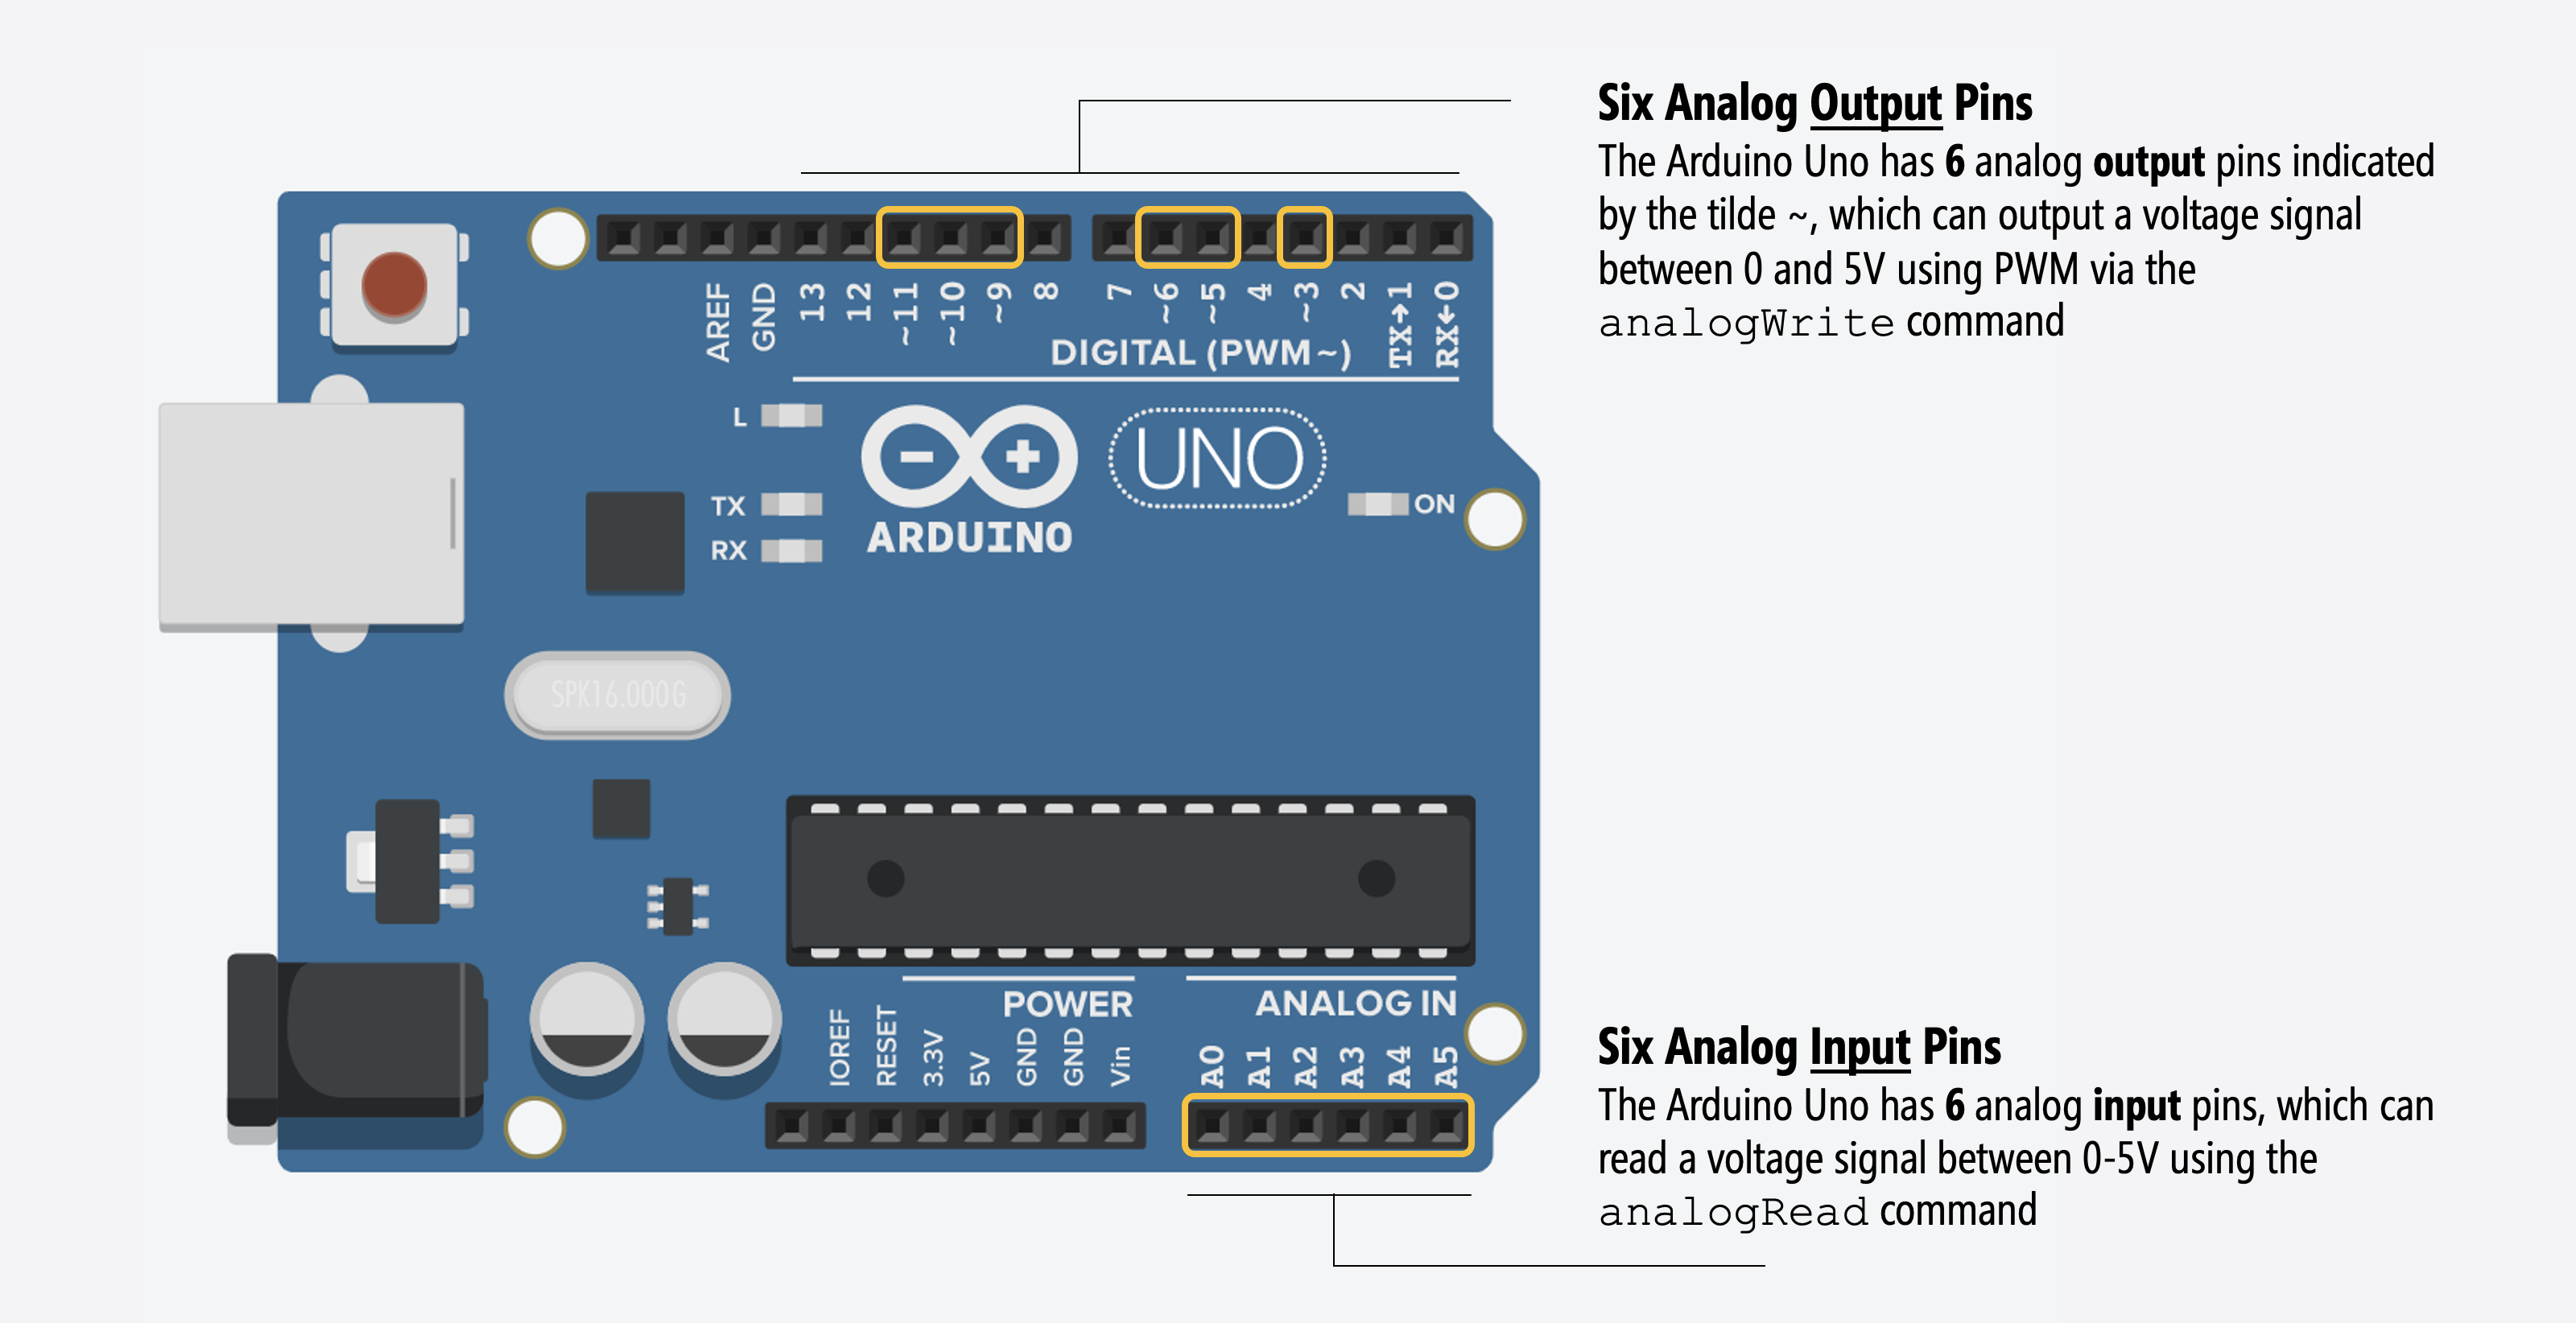 Annotated image of an Arduino Uno showing the difference between analog input and output pins